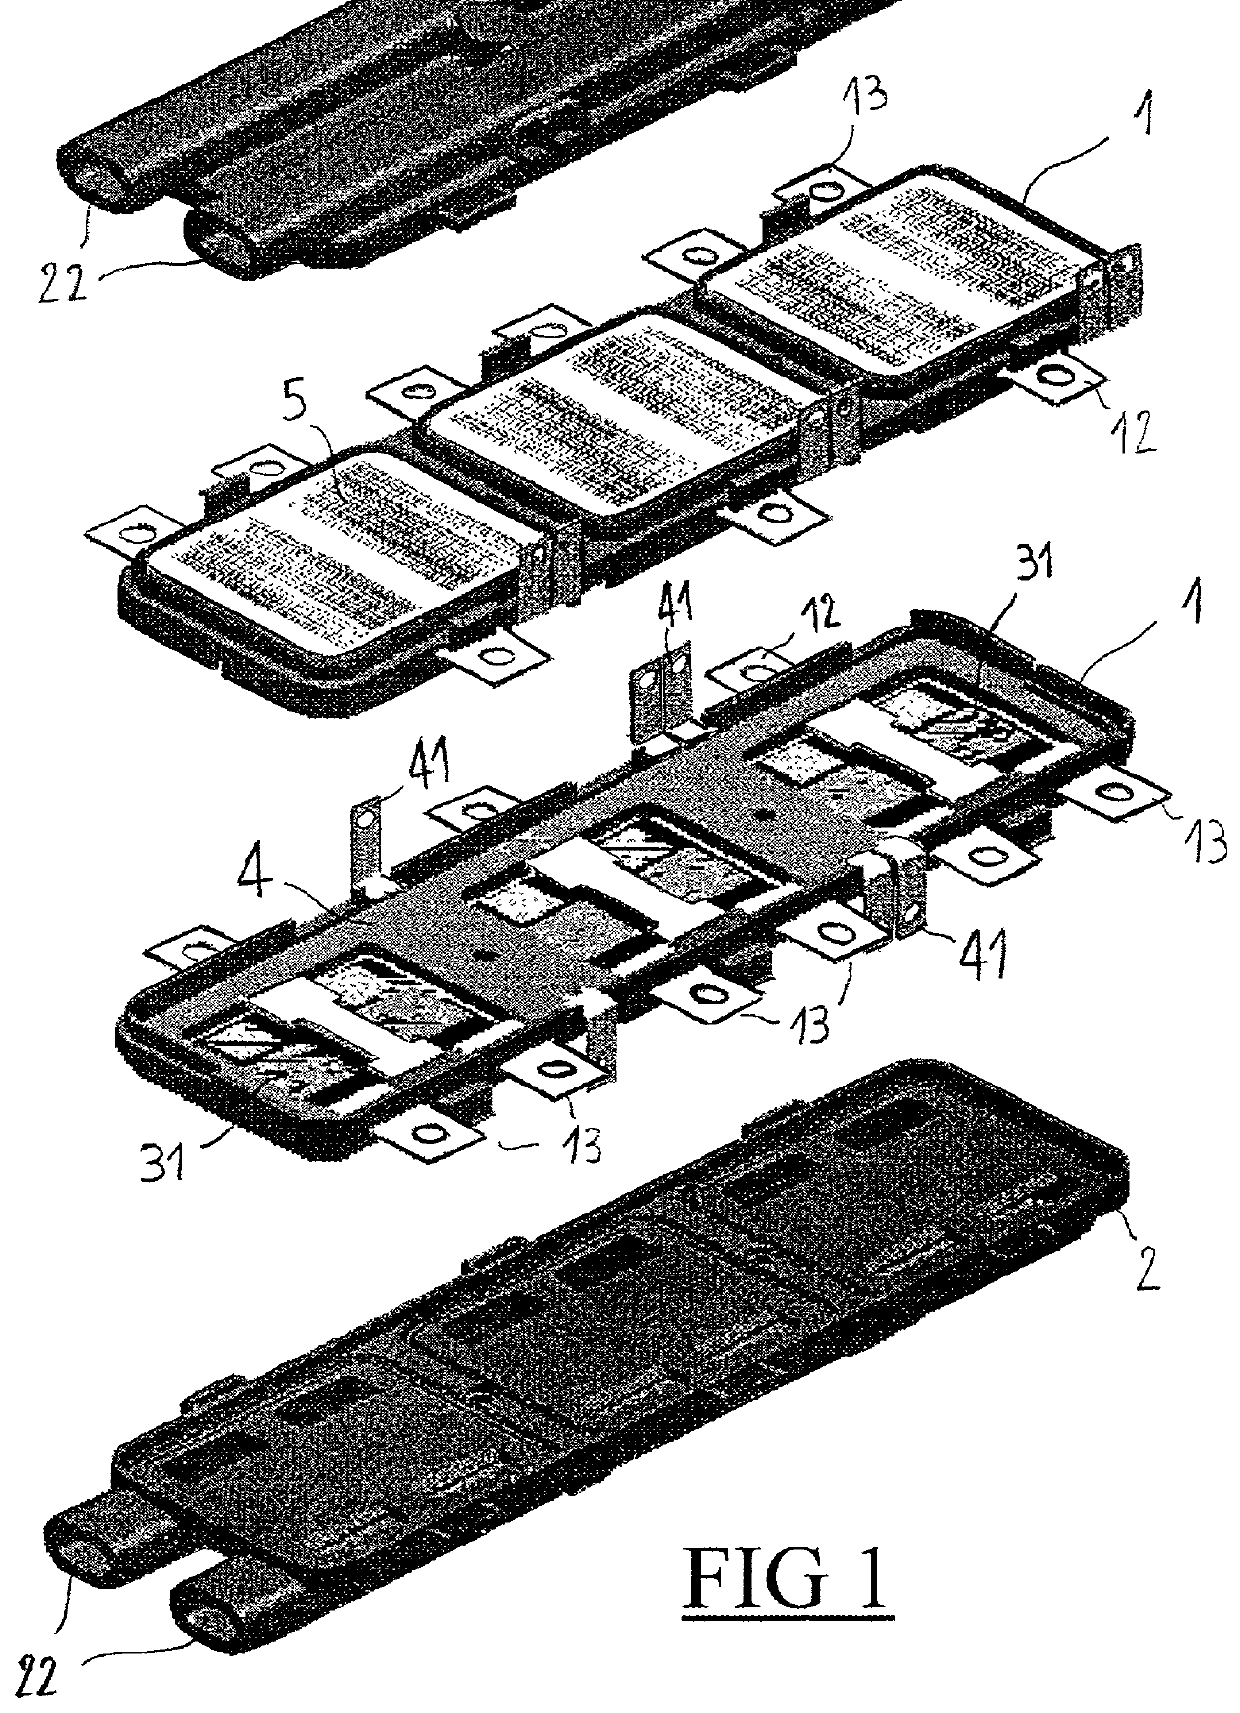 Electronic power device